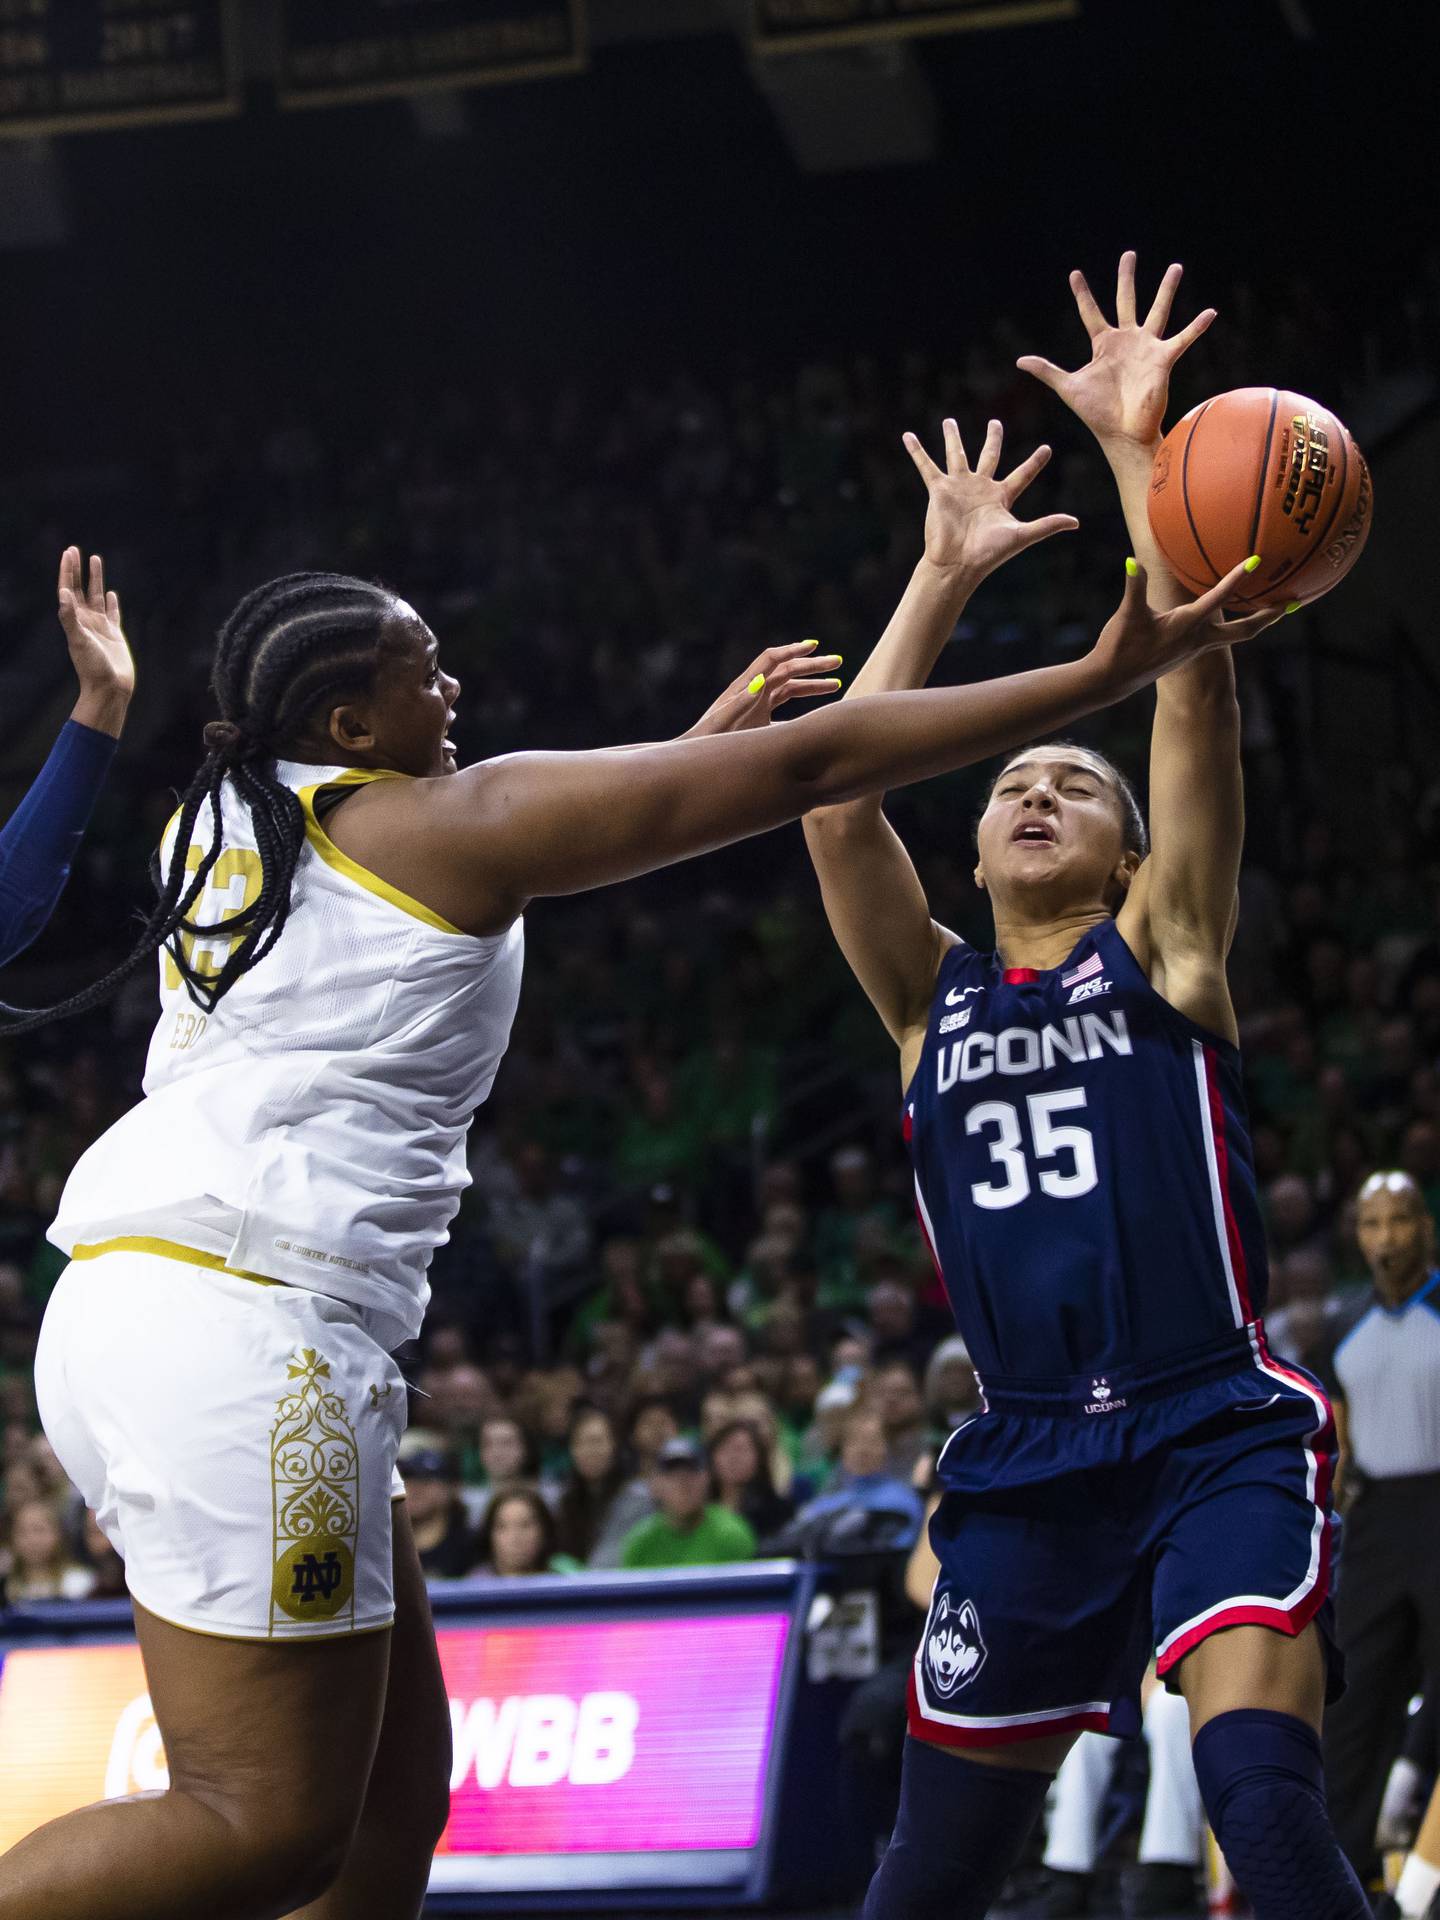 Notre Dame's Lauren Ebo (33) drives as Connecticut's Azzi Fudd (35) defends her during the first half of an NCAA college basketball game on Sunday, Dec. 4, 2022, in South Bend, Ind. (AP Photo/Michael Caterina)